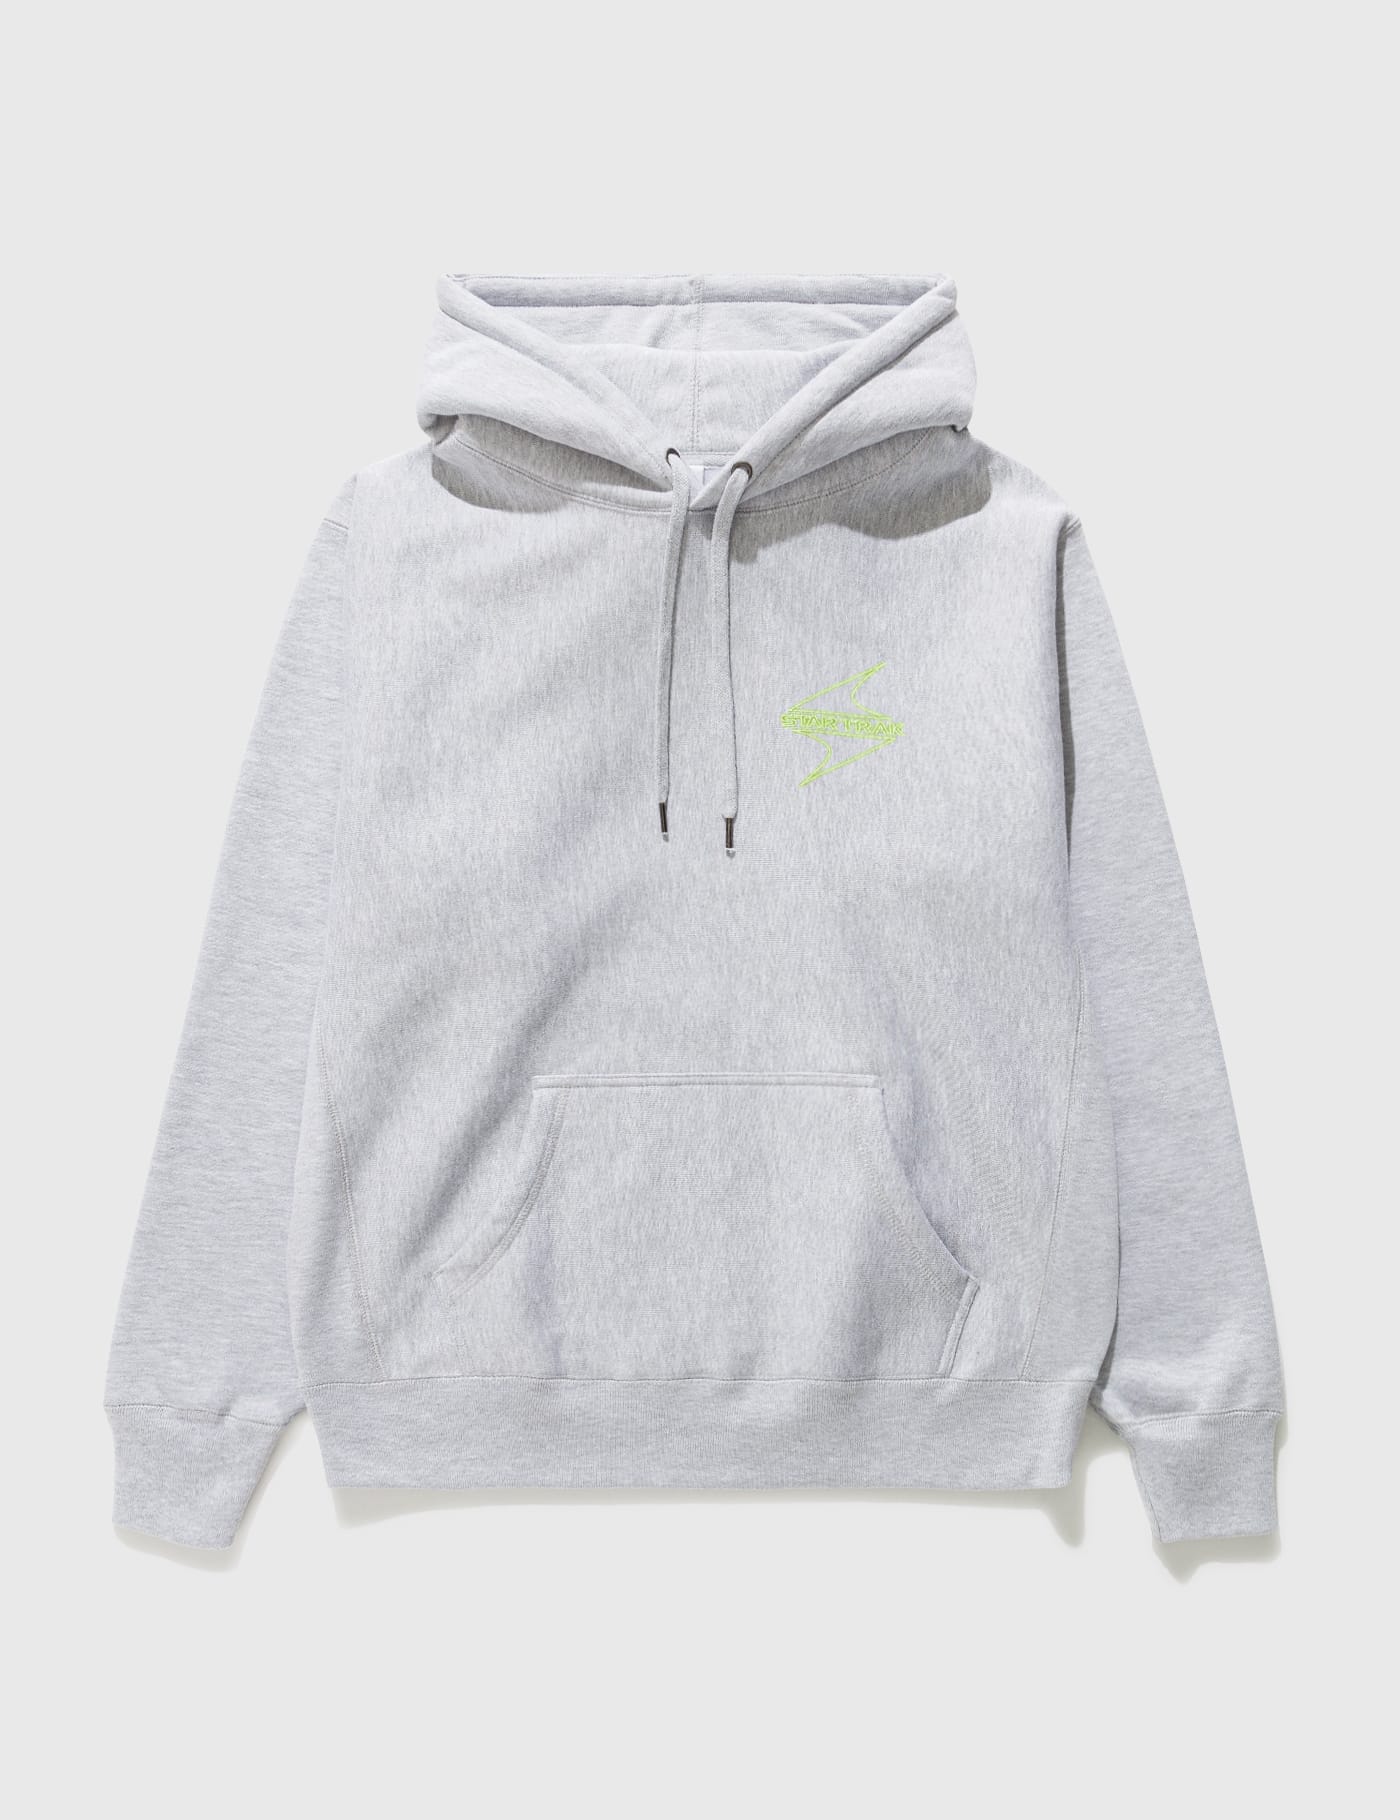 STAR TRAK - Logo Hoodie | HBX - Globally Curated Fashion and 